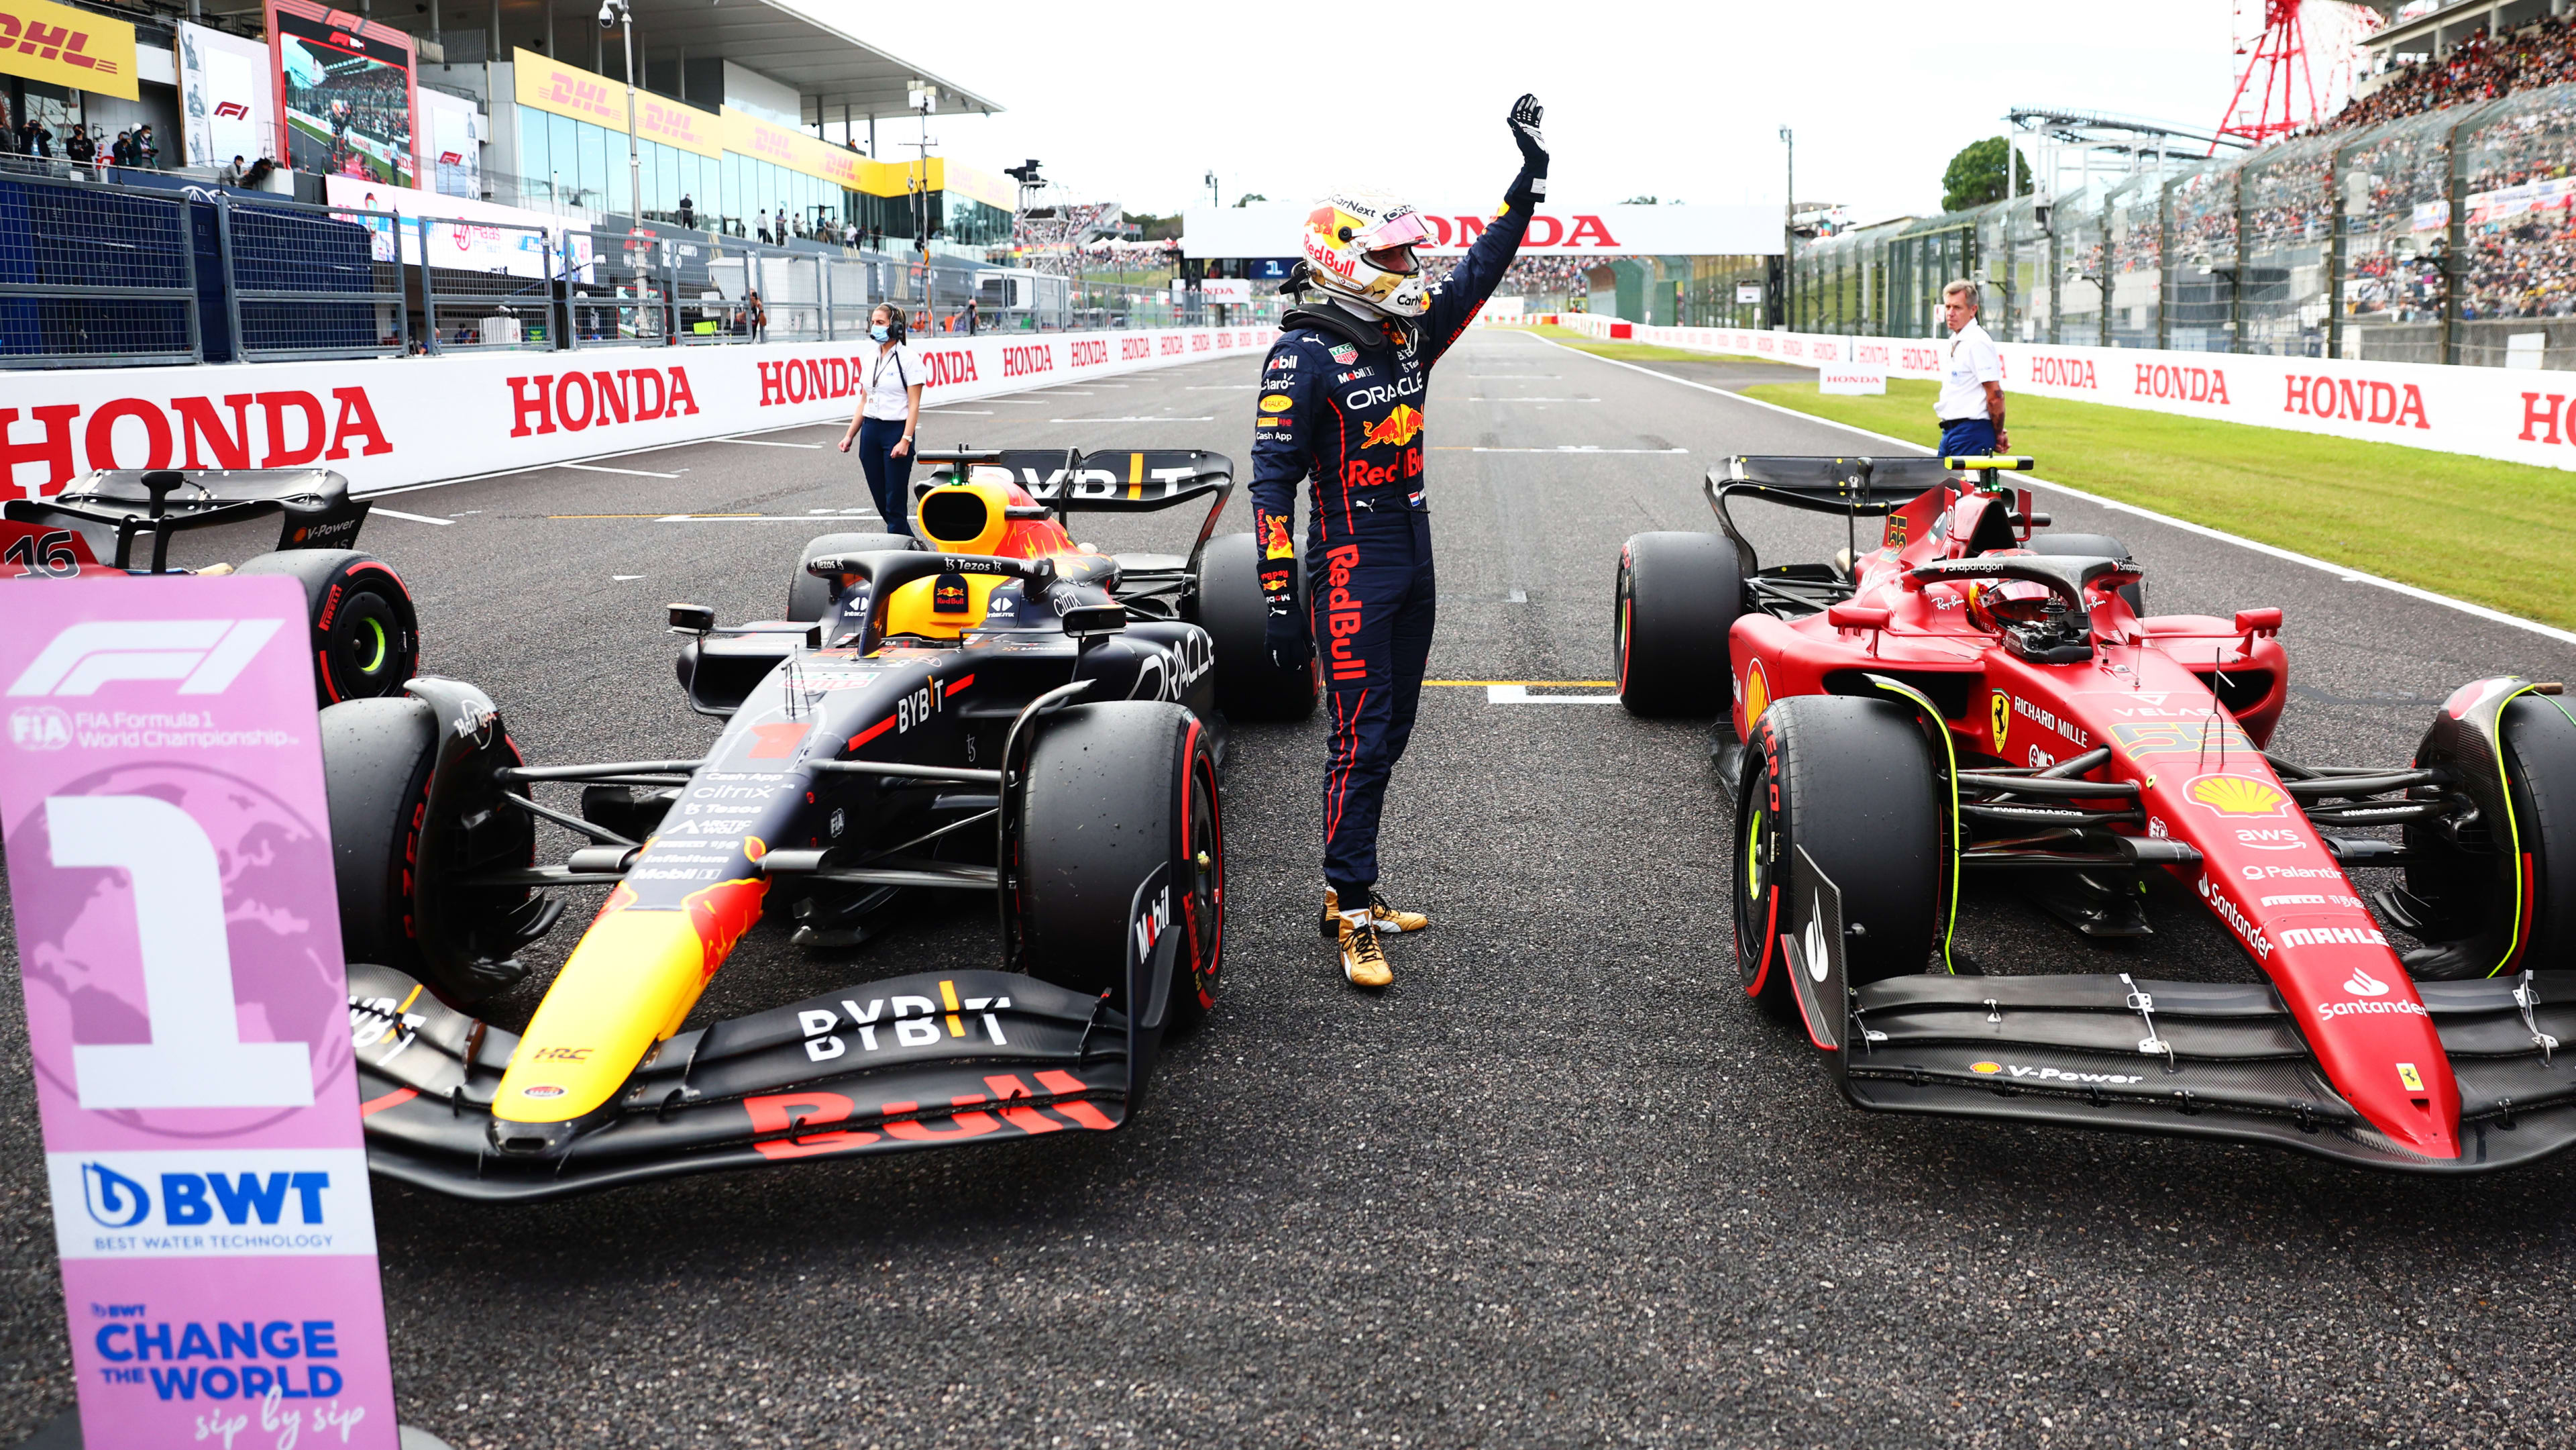 Verstappen beats Leclerc and Sainz to pole position in ultra-close Japanese GP qualifying Formula 1®